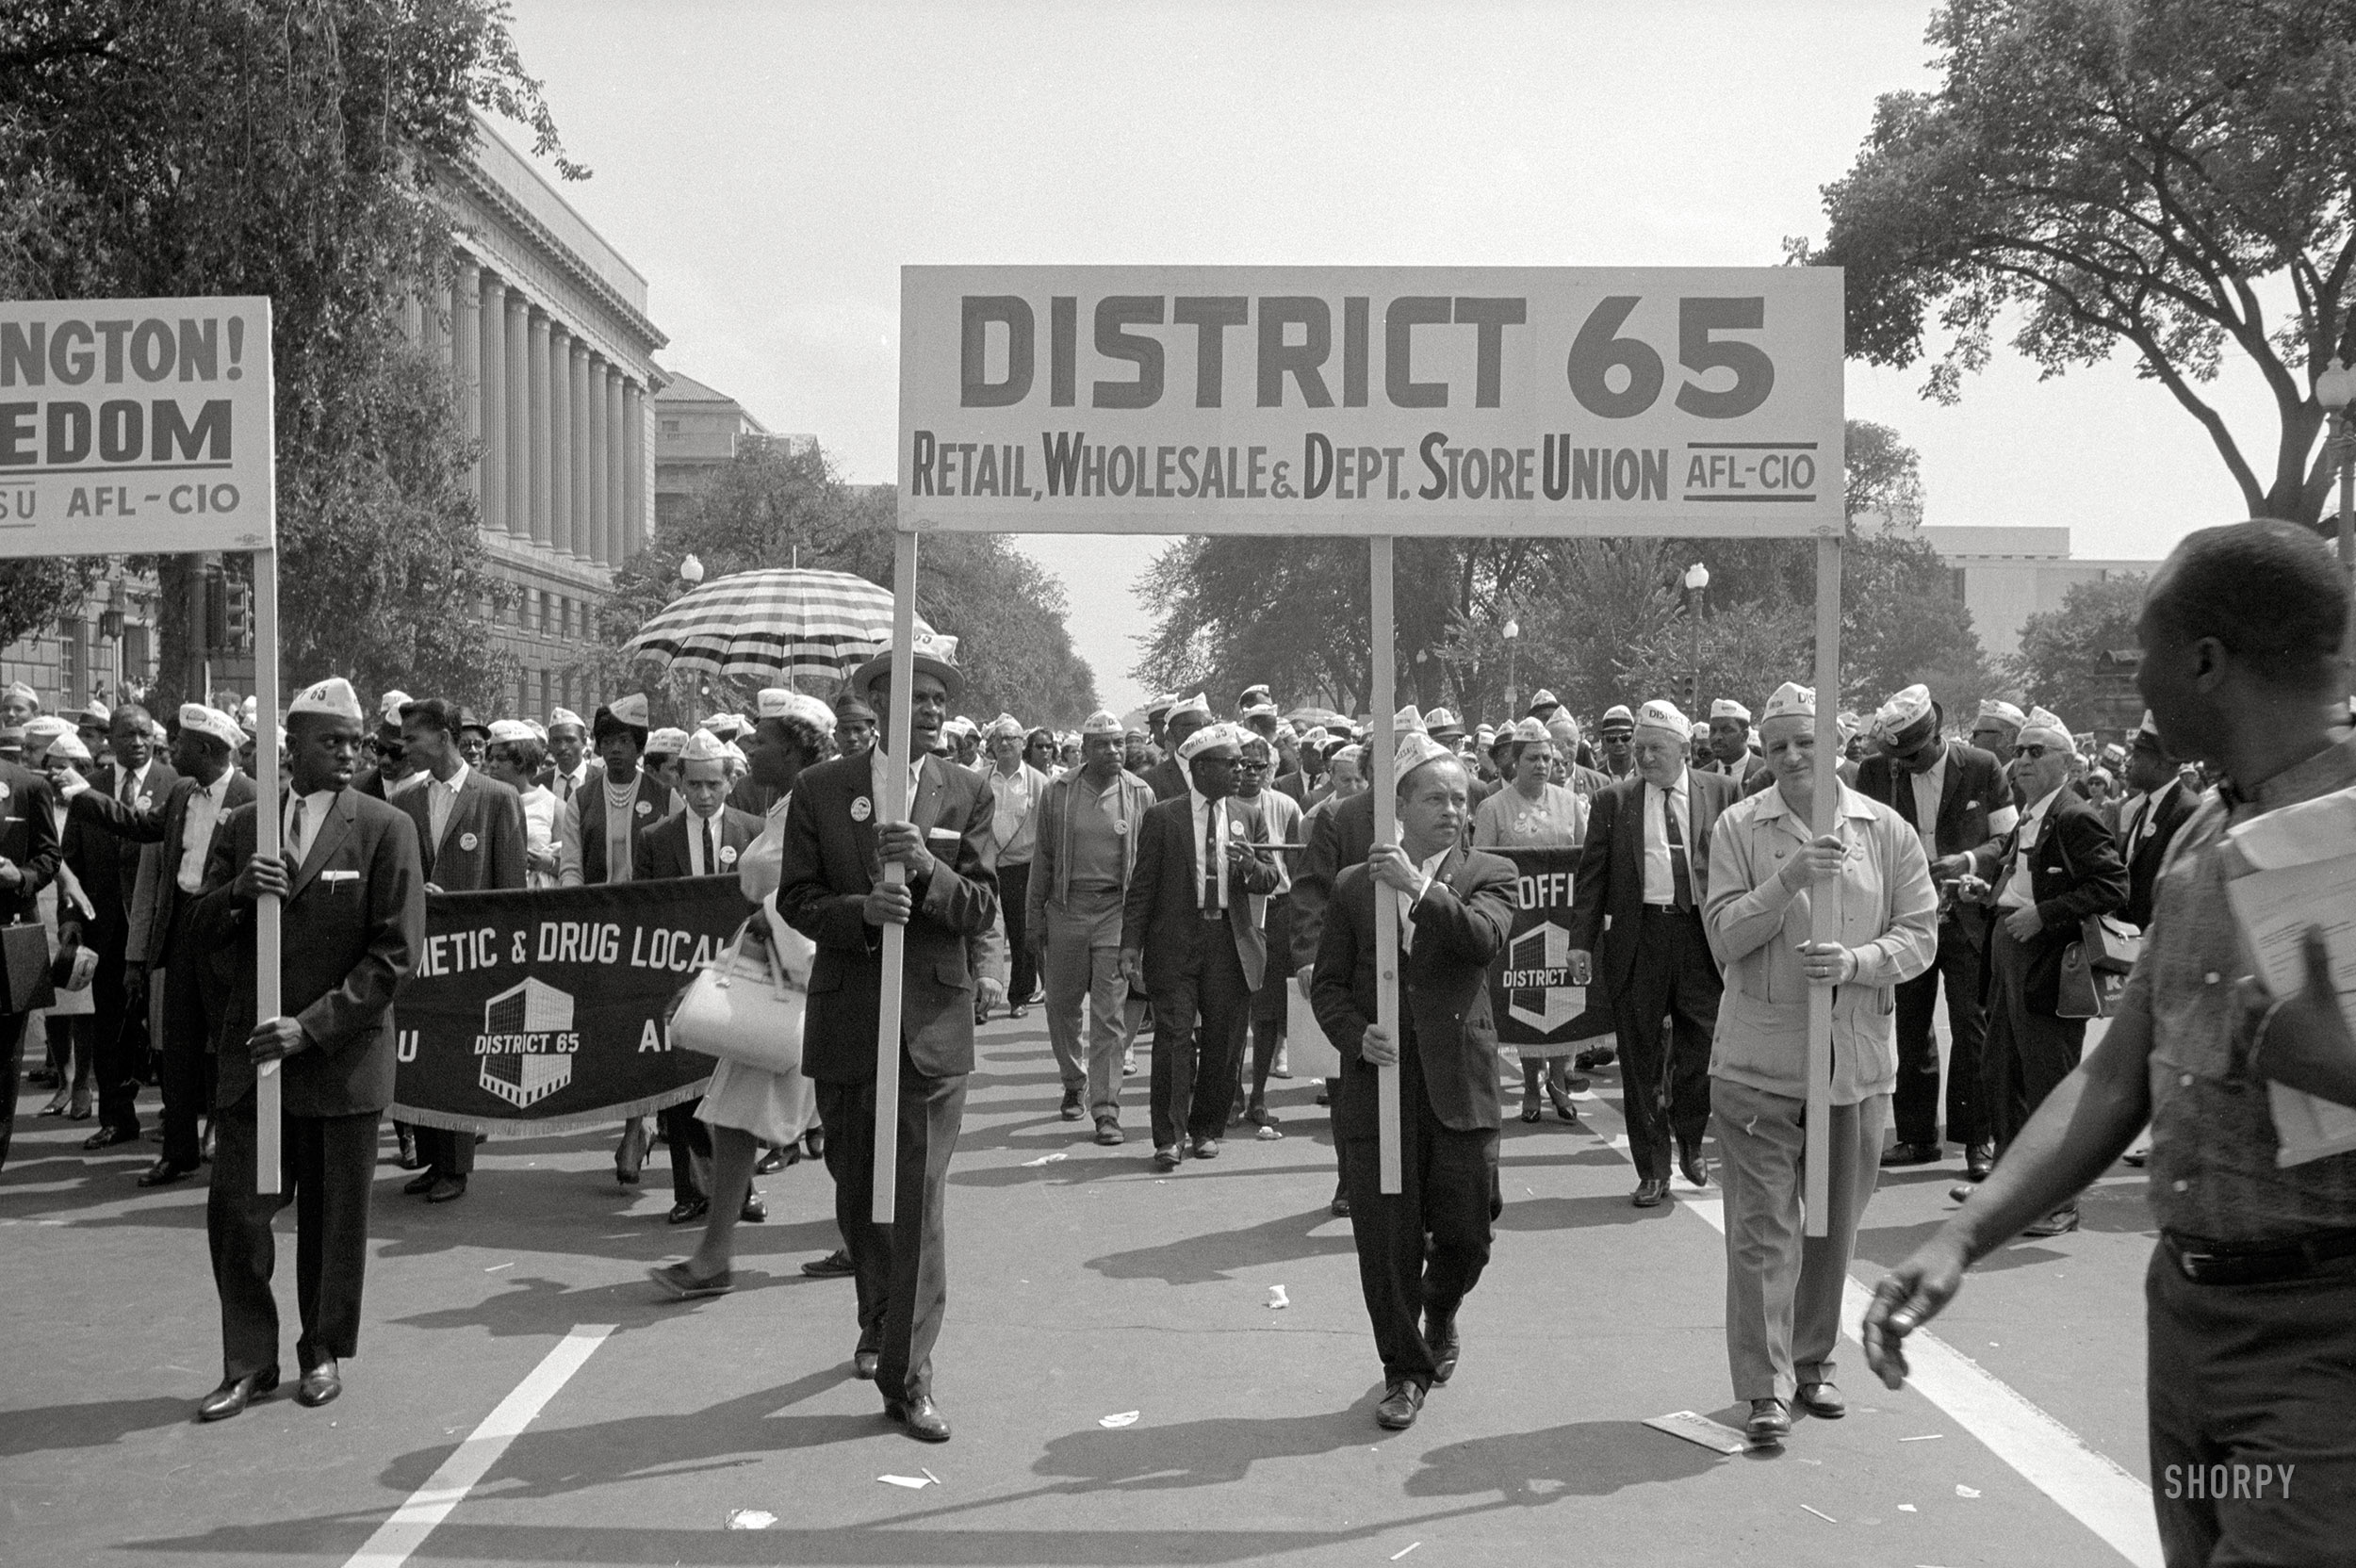 Aug. 28, 1963 -- fifty years ago. "March on Washington for Jobs and Freedom." Photo by Marion S. Trikosko for U.S. News & World Report. View full size.